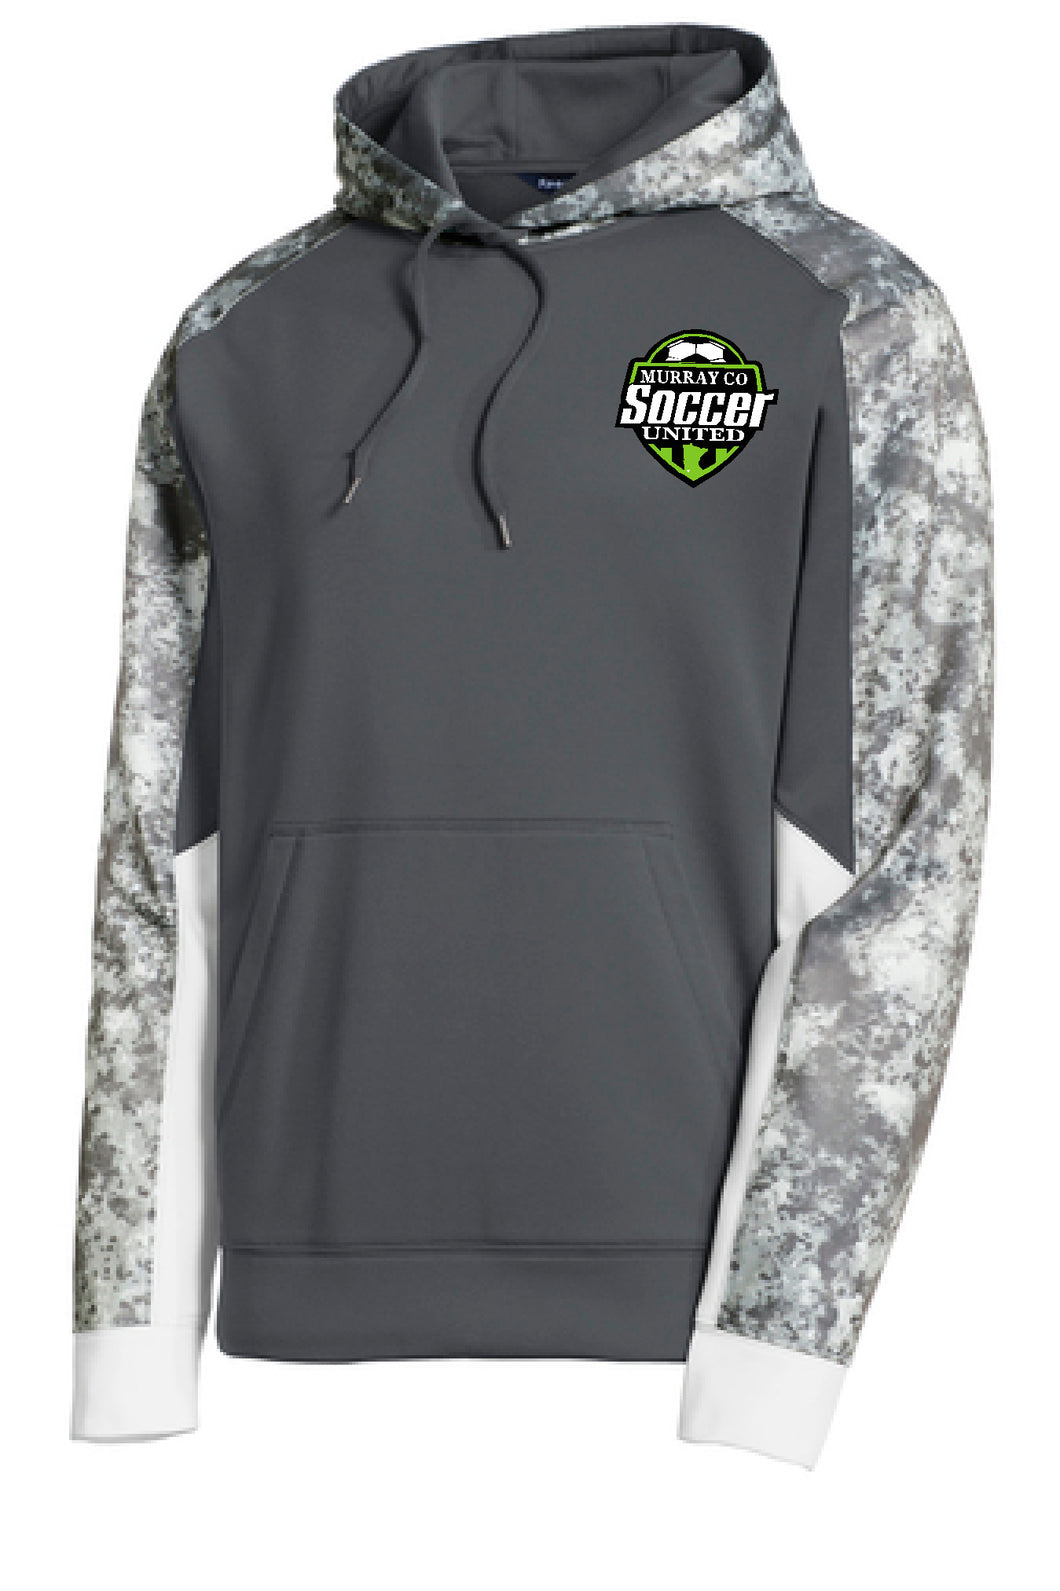 MURRAY COUNTY SOCCER UNITED HOODED GREY  PULLOVER